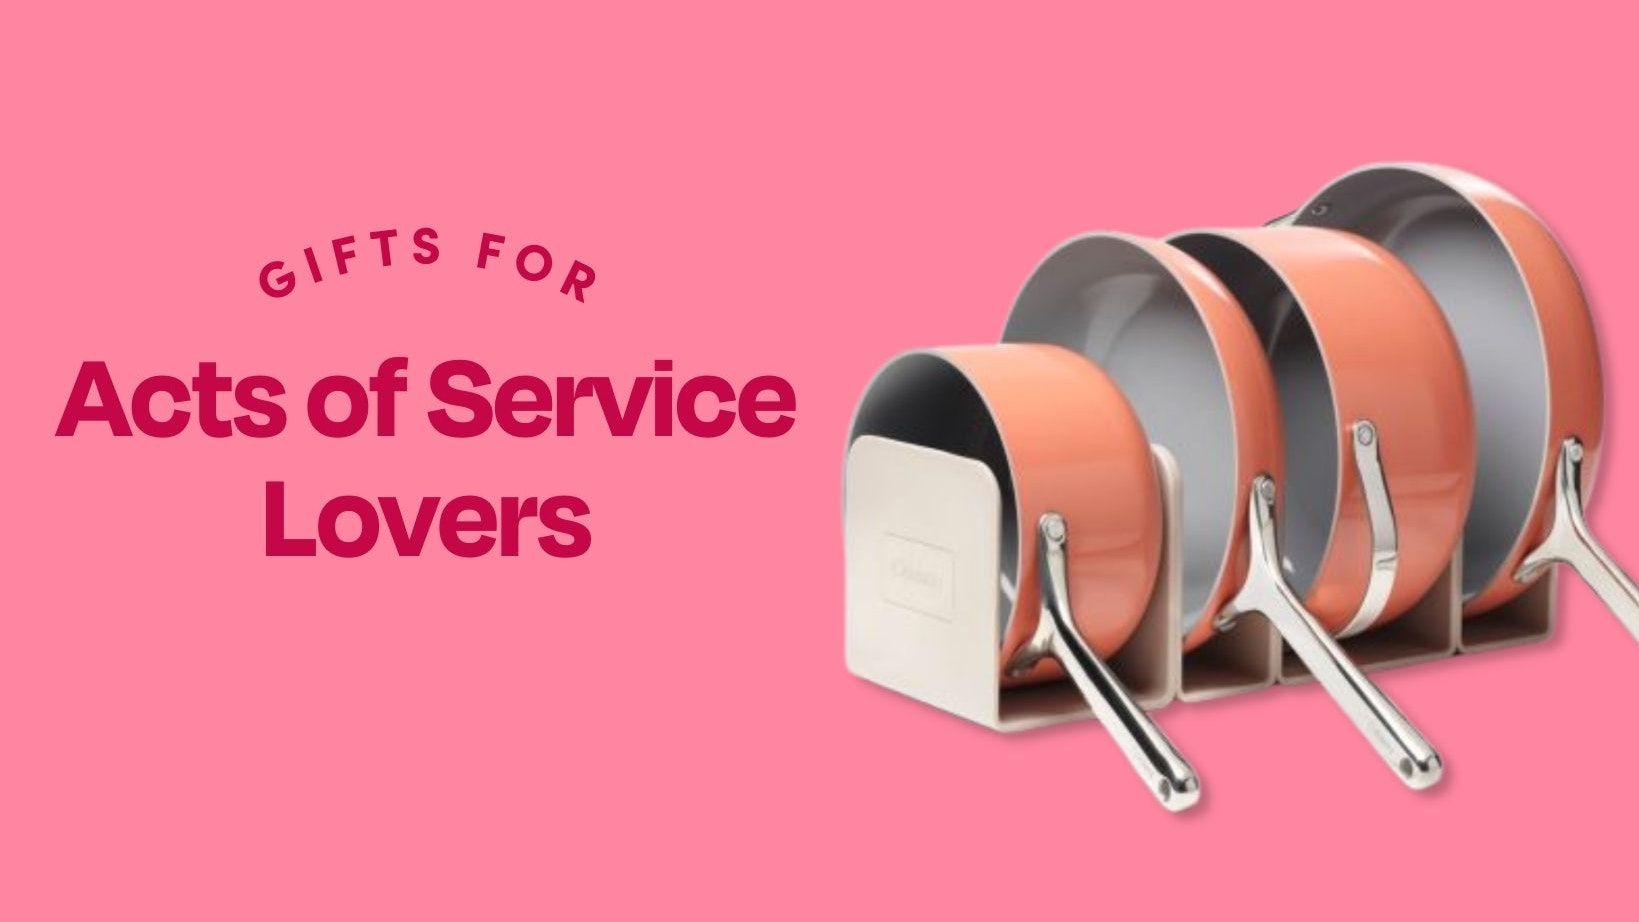 Gifts for Acts of Service Lovers